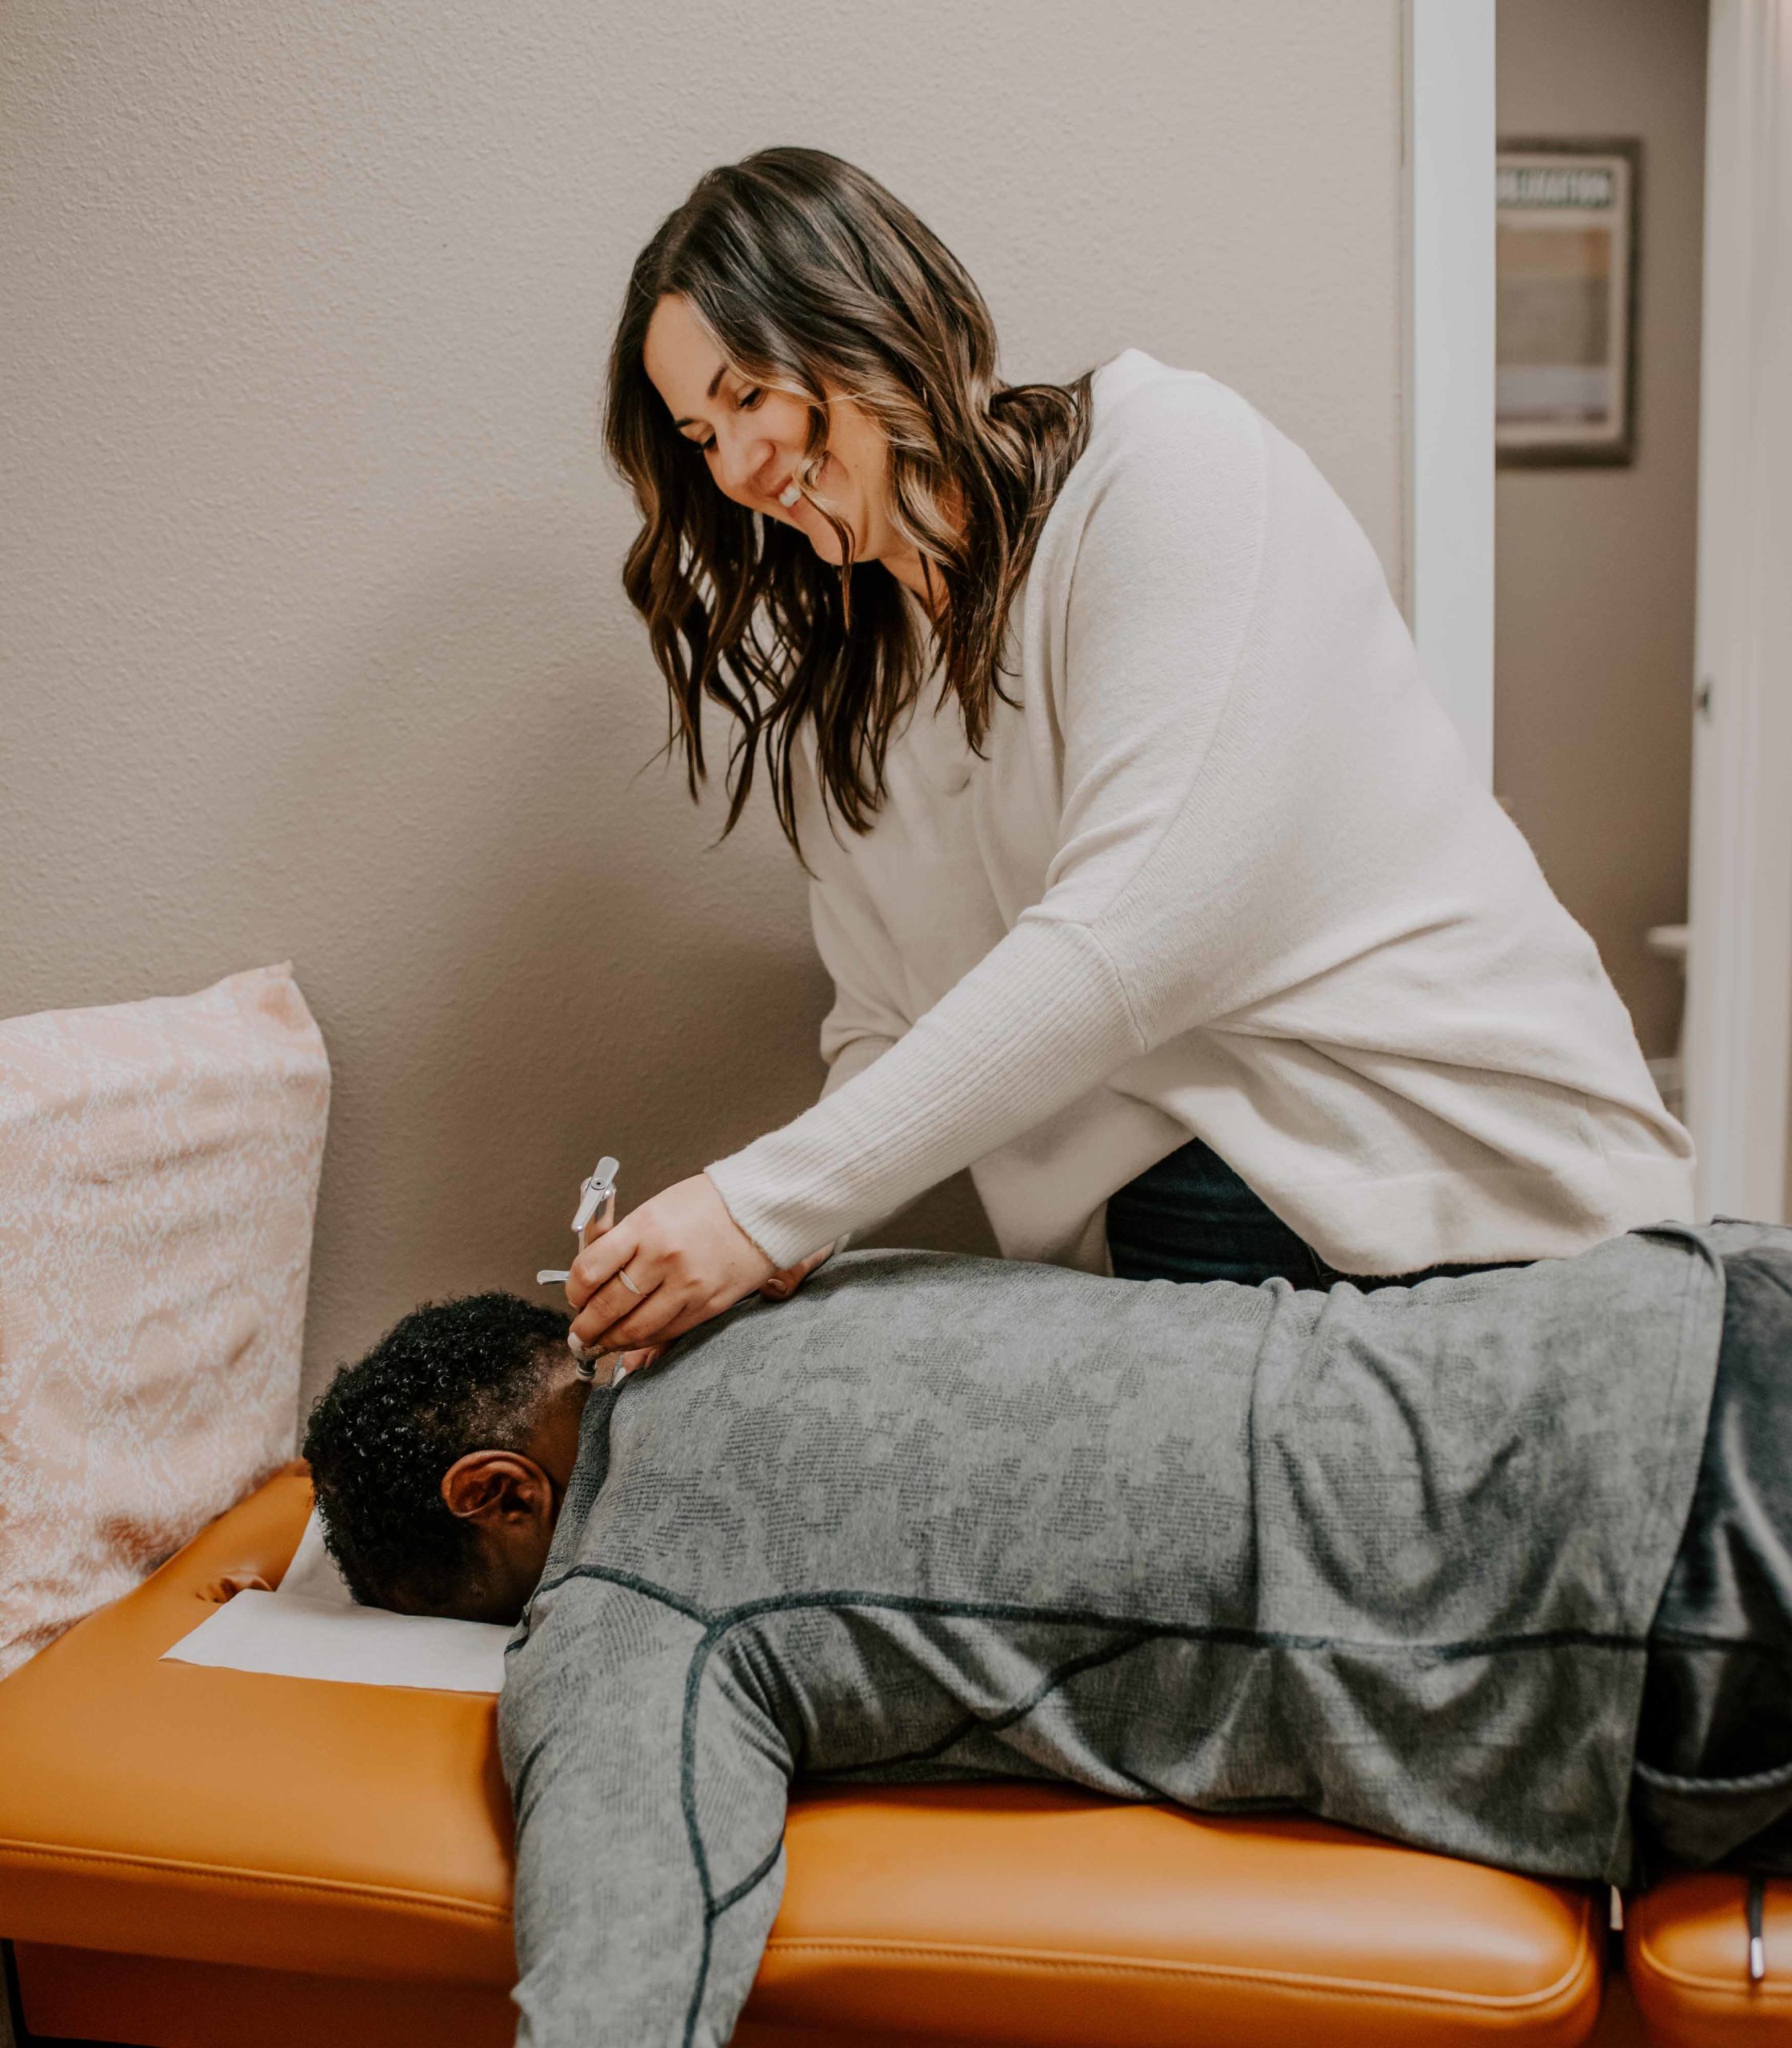 man getting chiropractic care